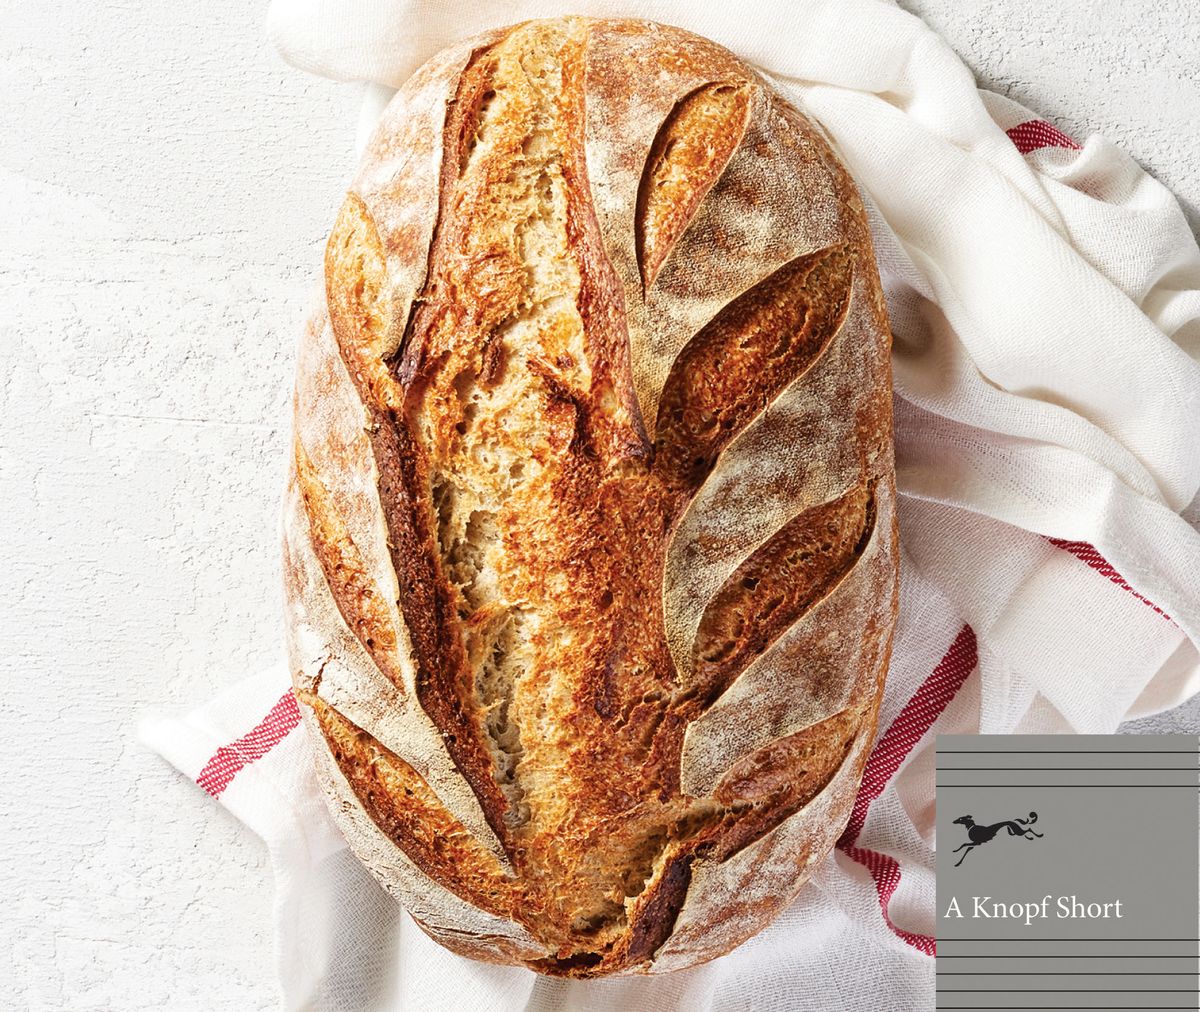 The Essential Bread Recipe That James Beard *Himself* Swore By